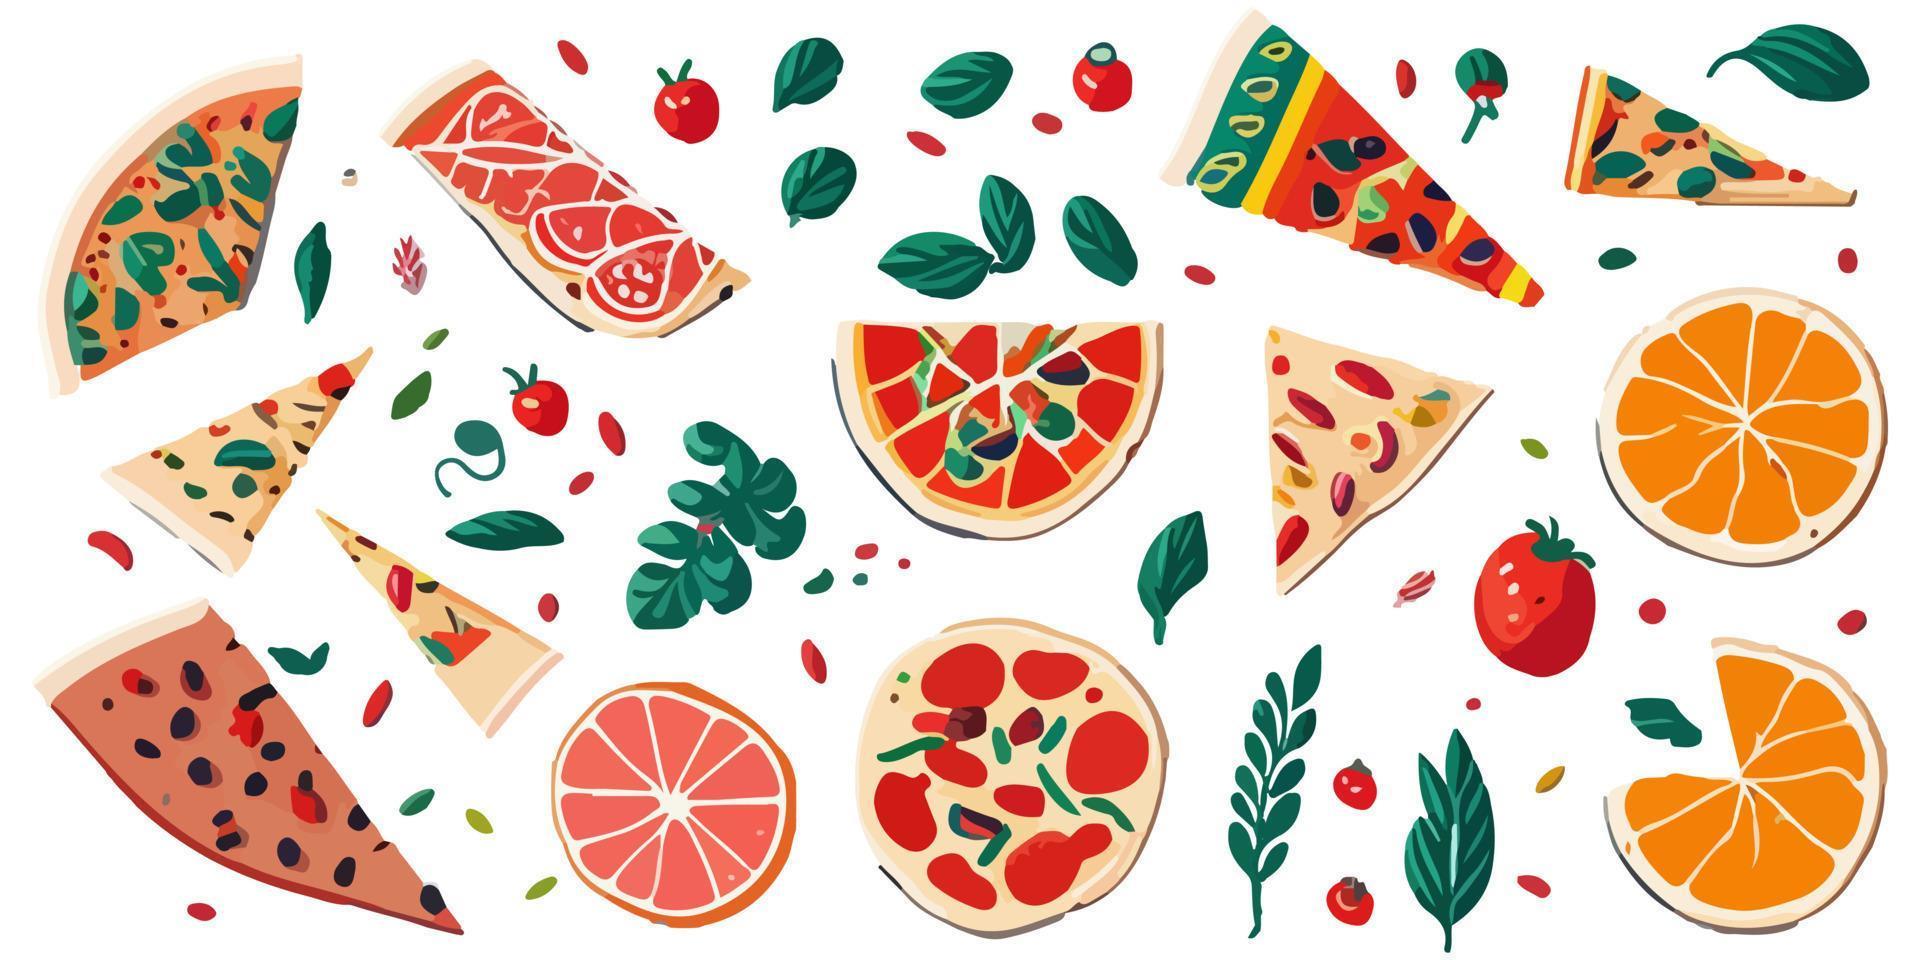 Colorful and Tasty Flat Vector Illustration of a Slice of Pizza